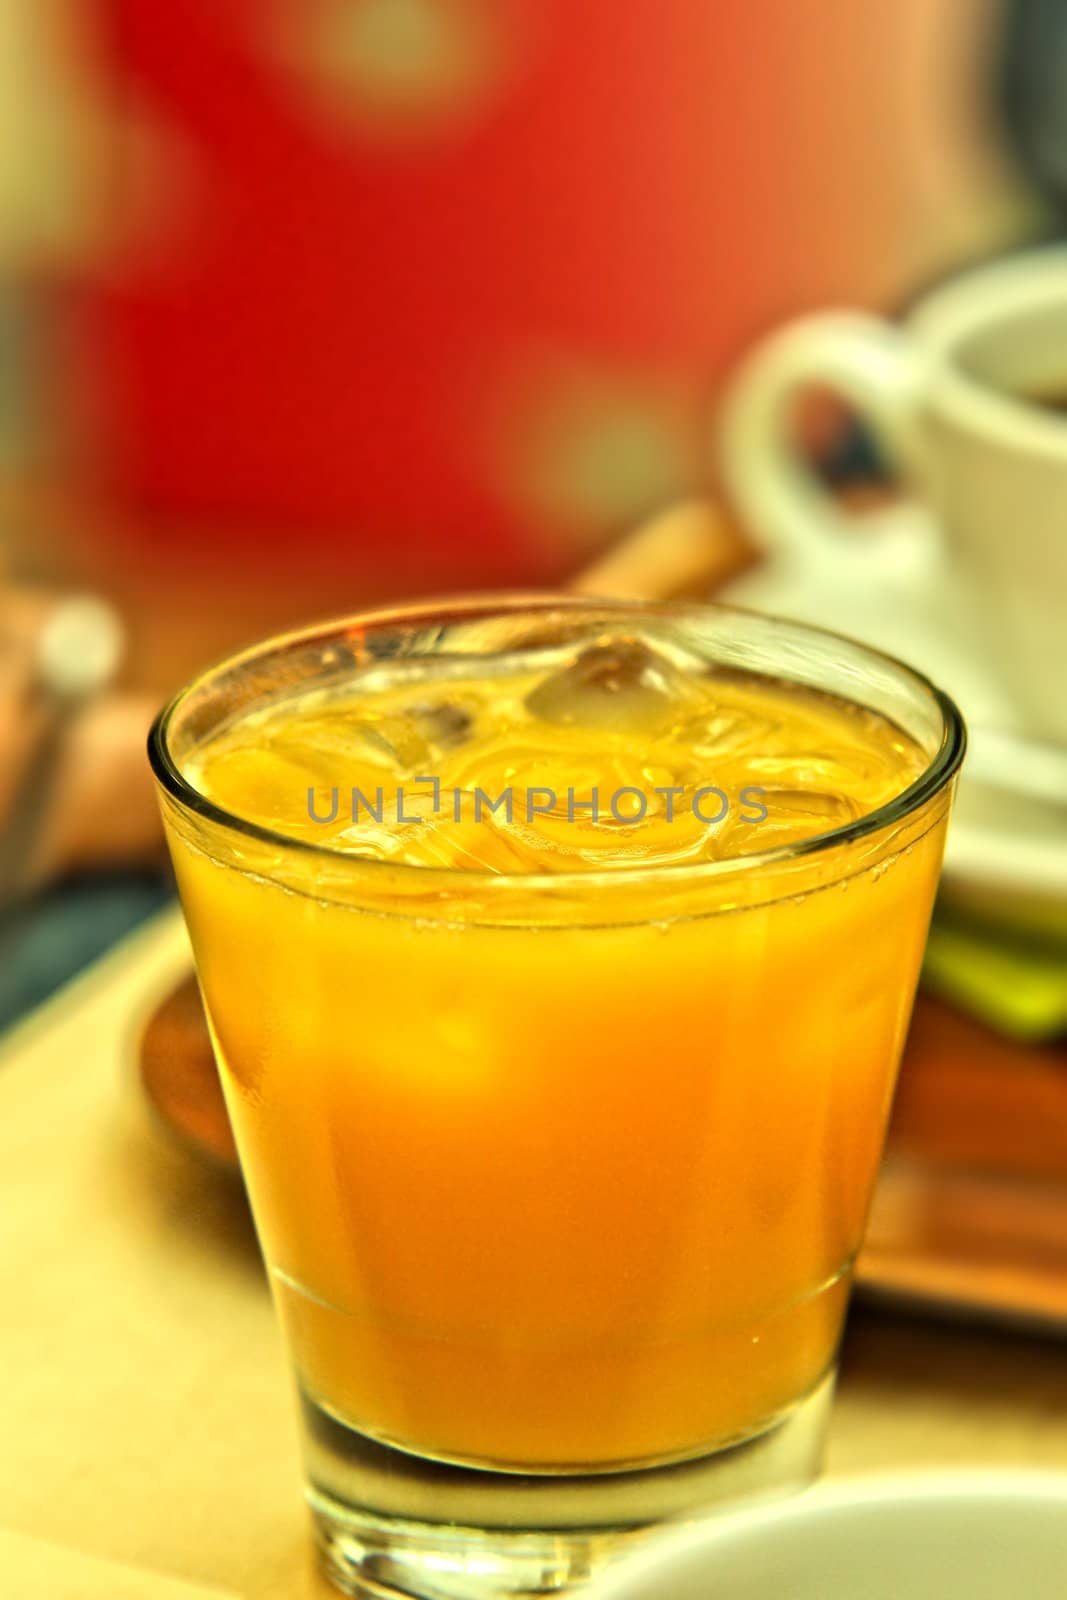 Glass of juice with ice cubes, next to a coffee mug